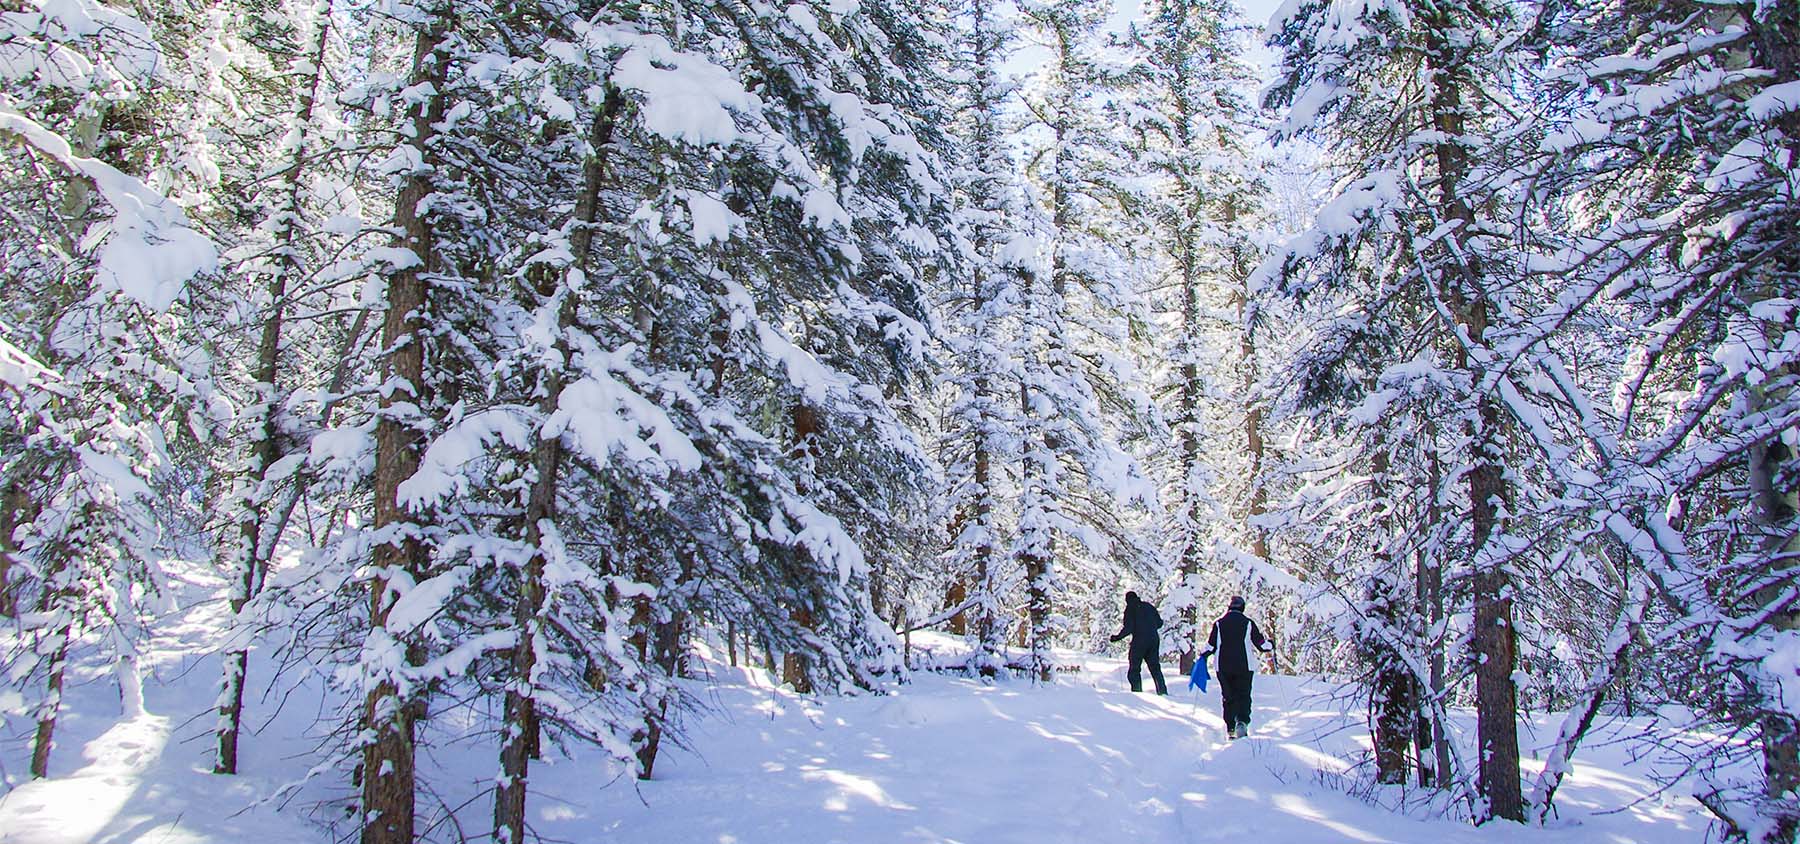 Snowshoeing near South Fork